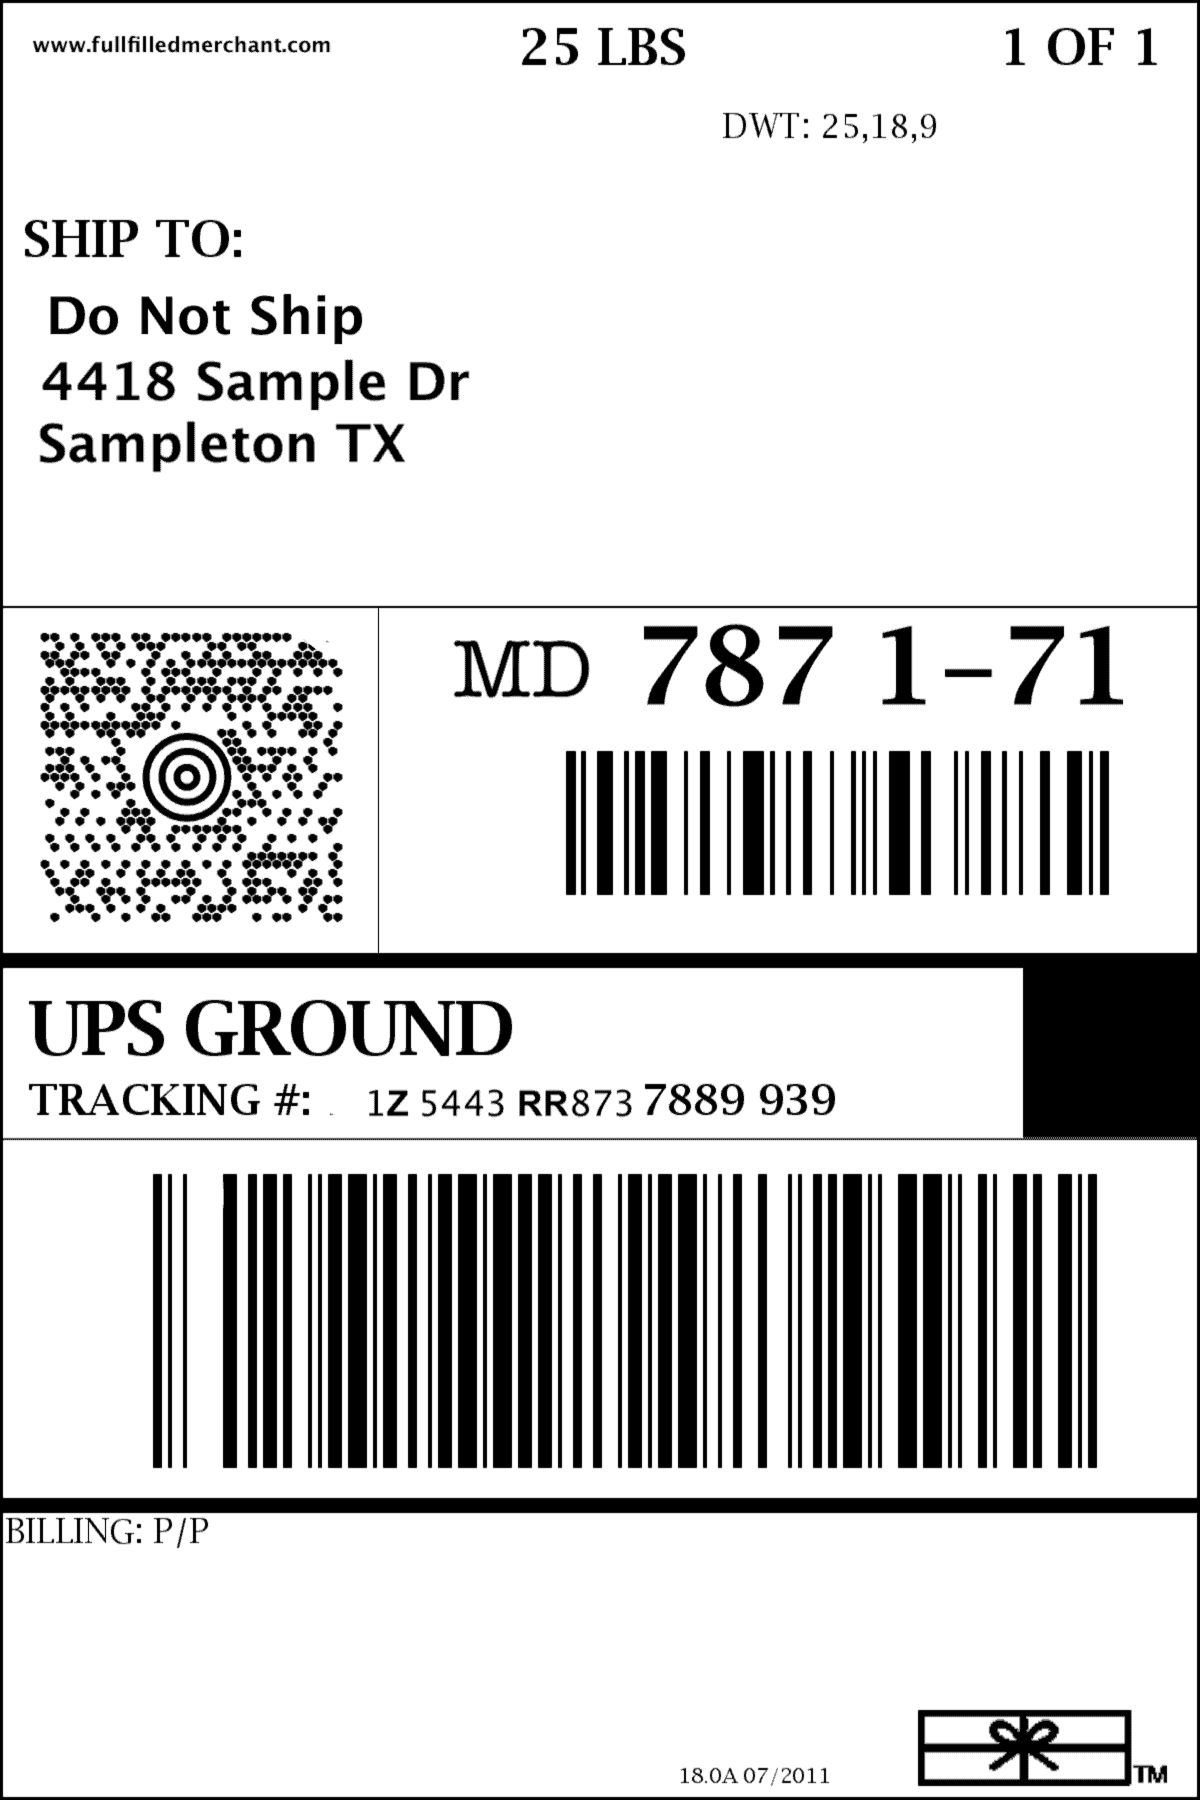 Need a Sample Label for a 22x22 Test Print? - Fulfilled Merchant For Ups Shipping Label Template